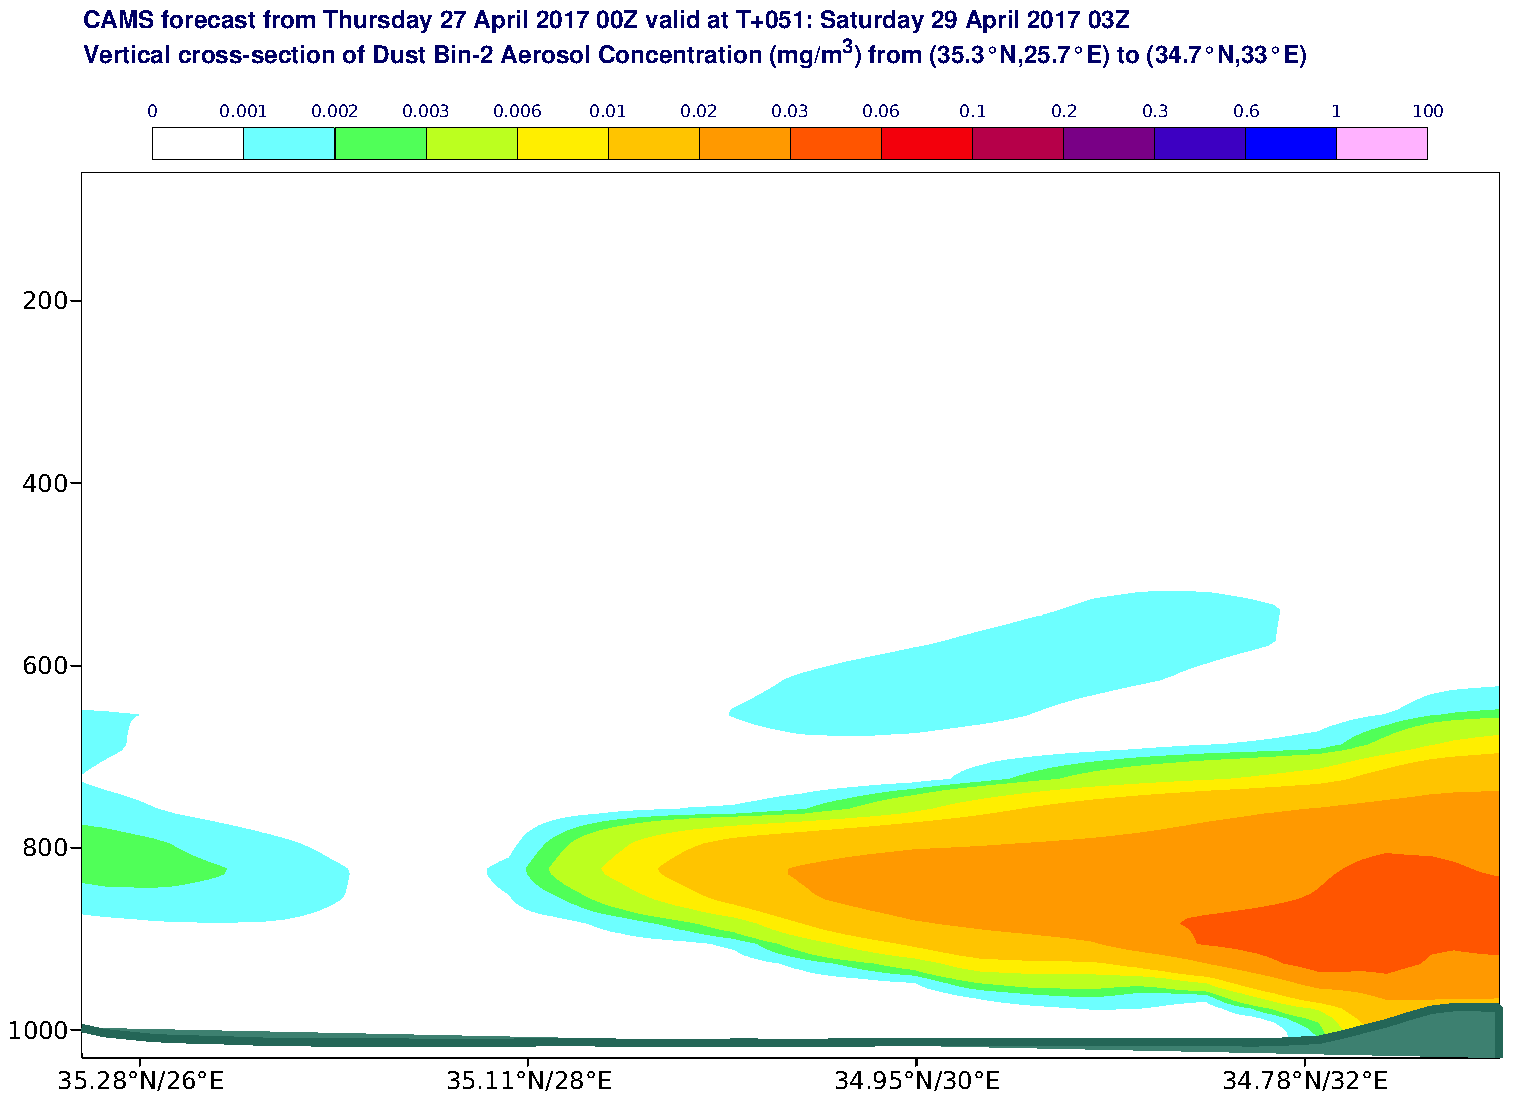 Vertical cross-section of Dust Bin-2 Aerosol Concentration (mg/m3) valid at T51 - 2017-04-29 03:00